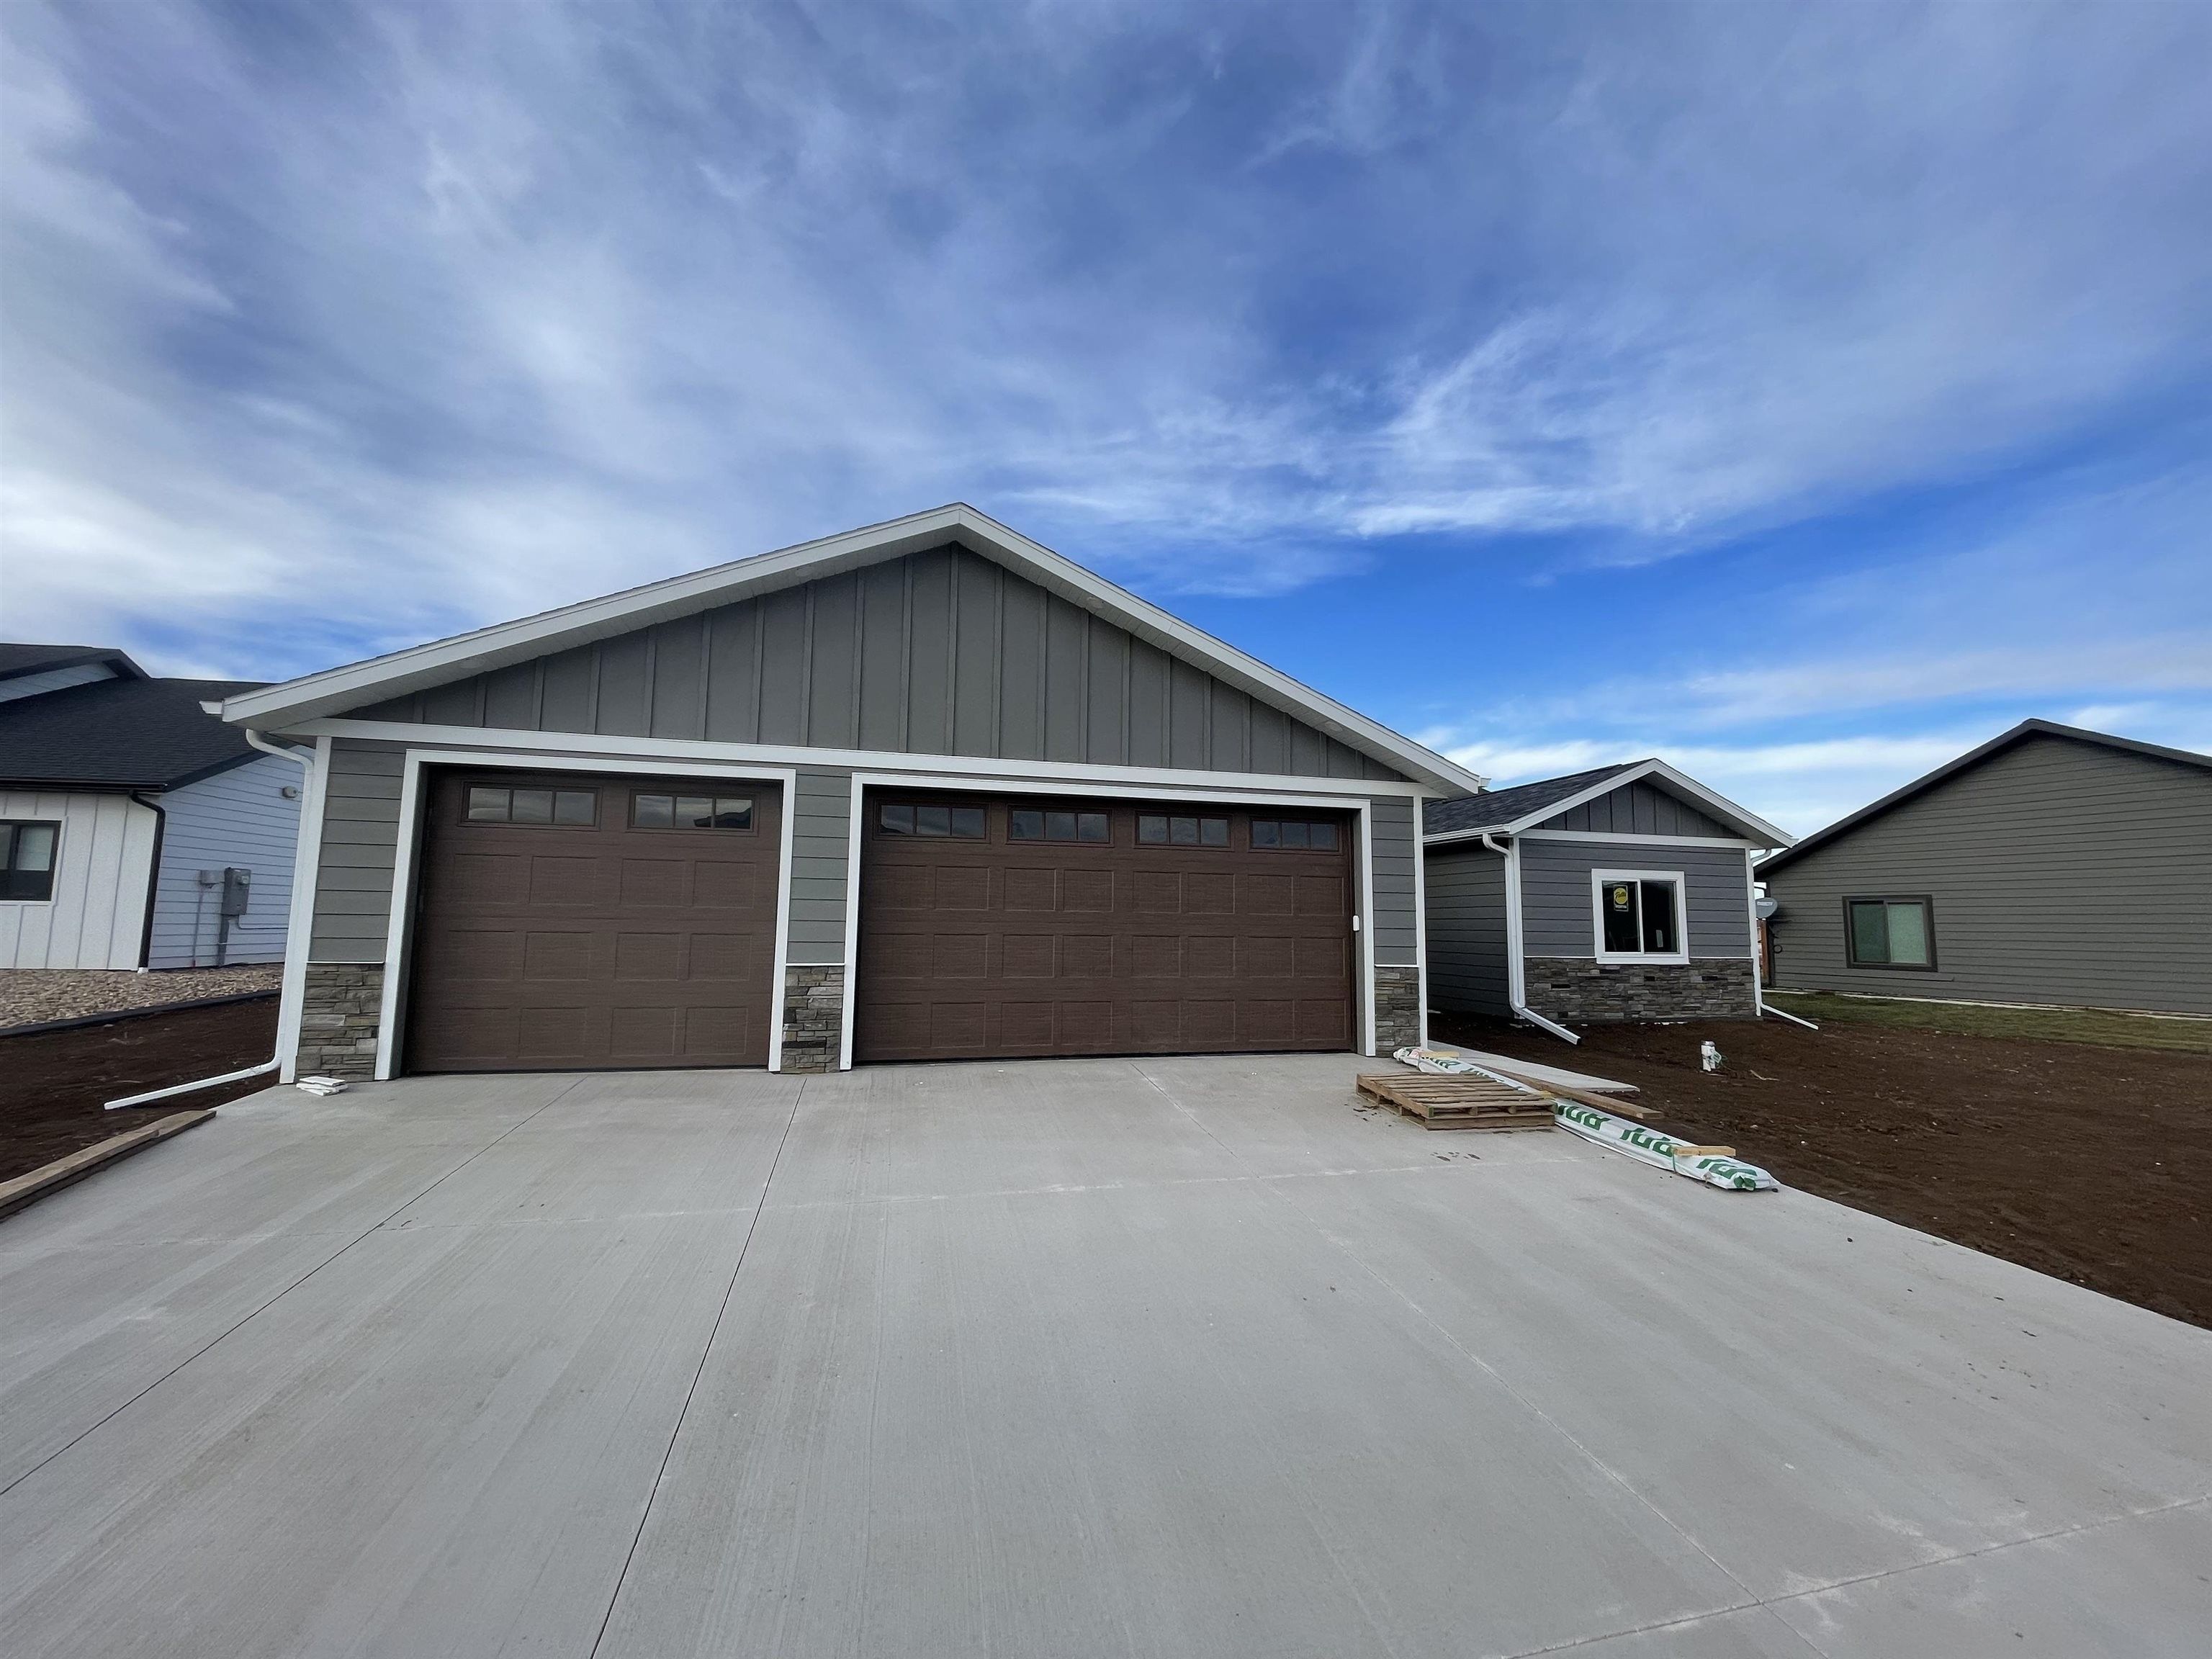 3923 Powder River Ave. Spearfish, SD 57783